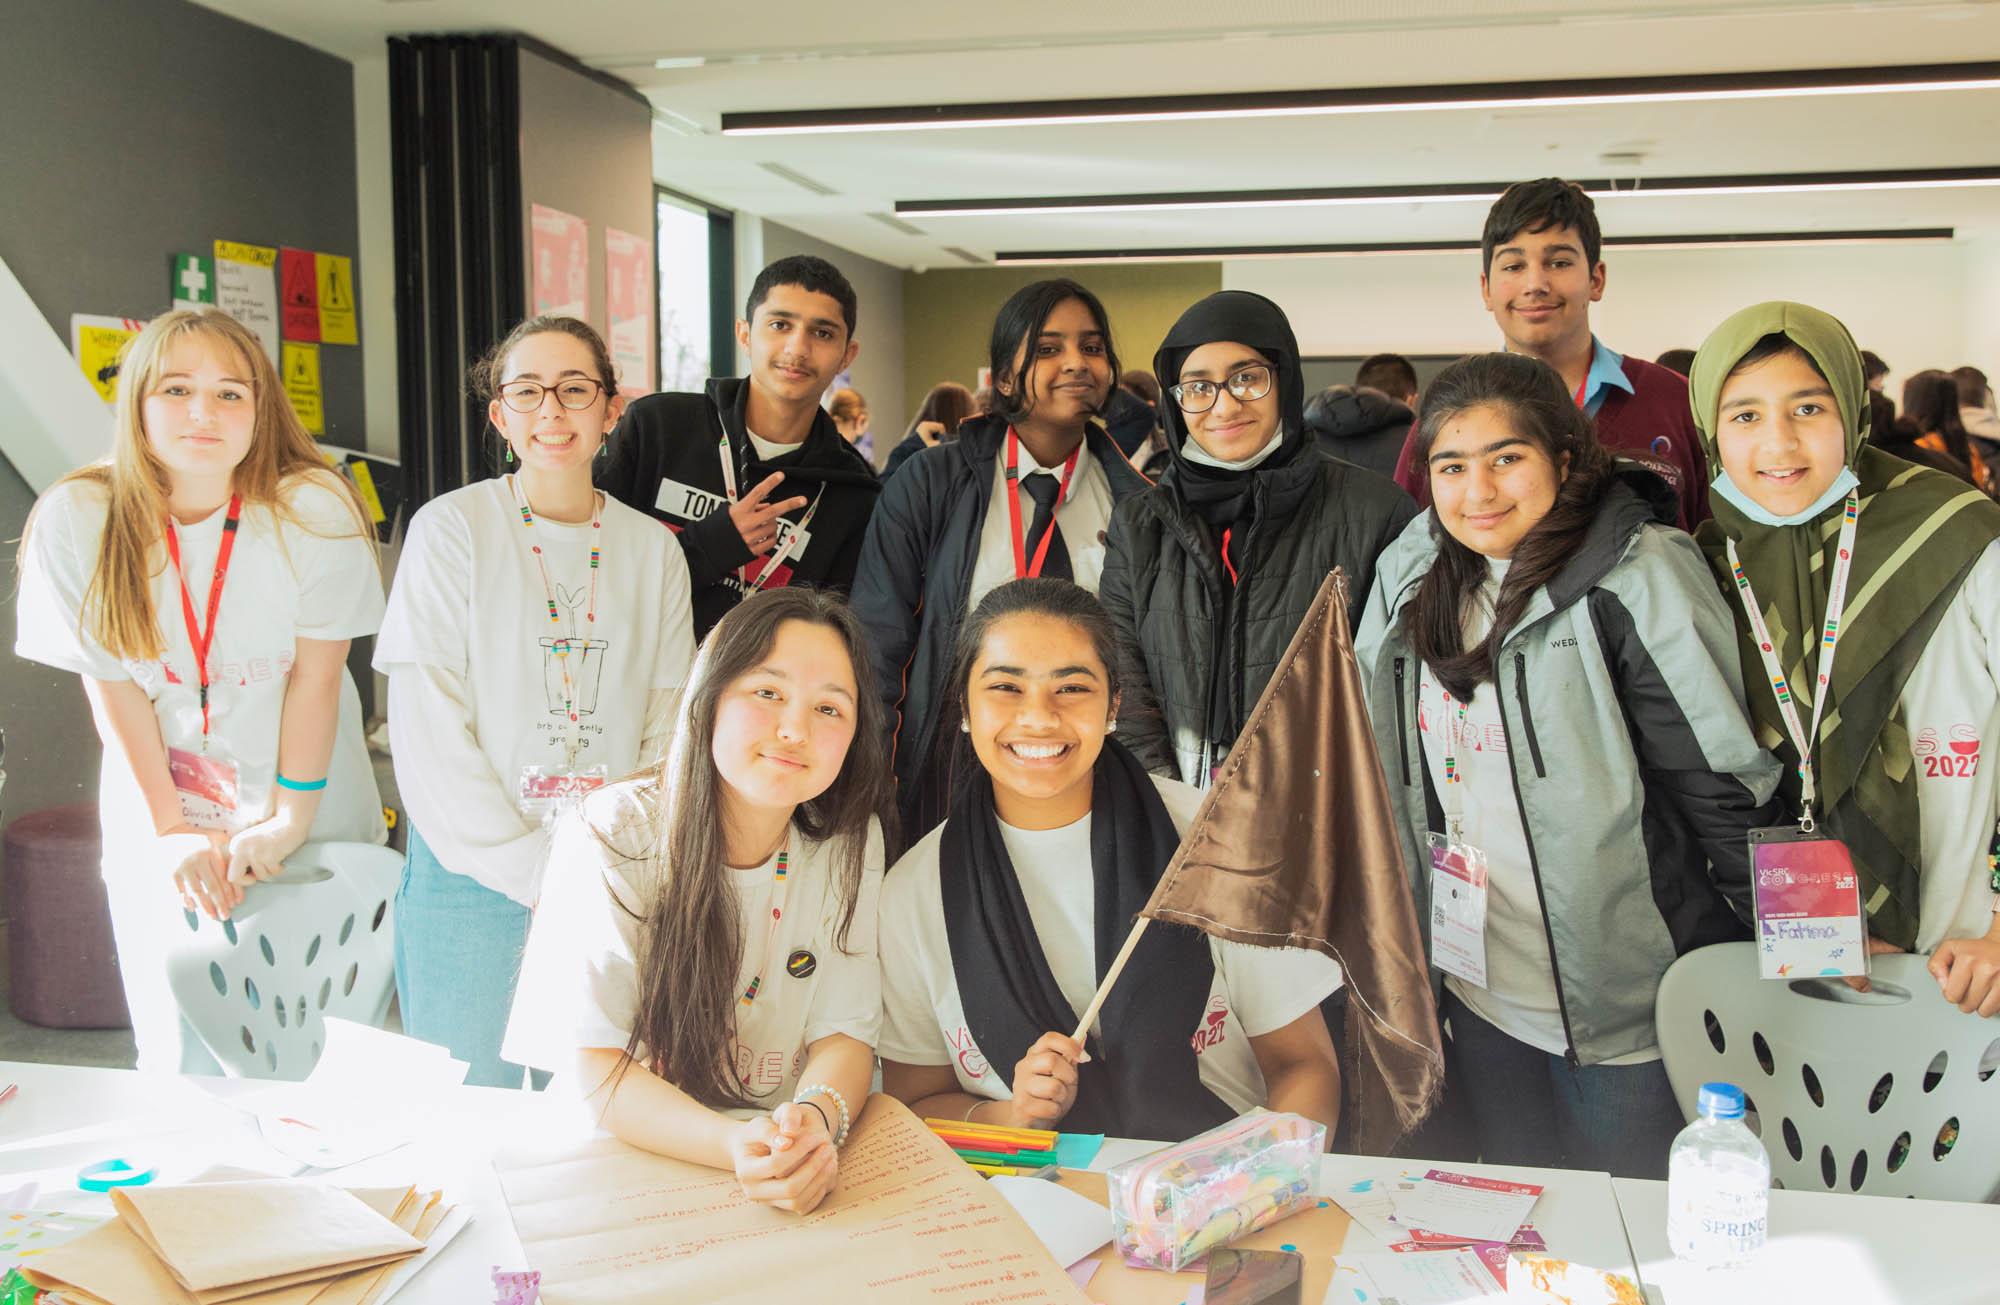 A group of students who are part of the brown action team smile at the camera as they stand behind a table where they have been working.